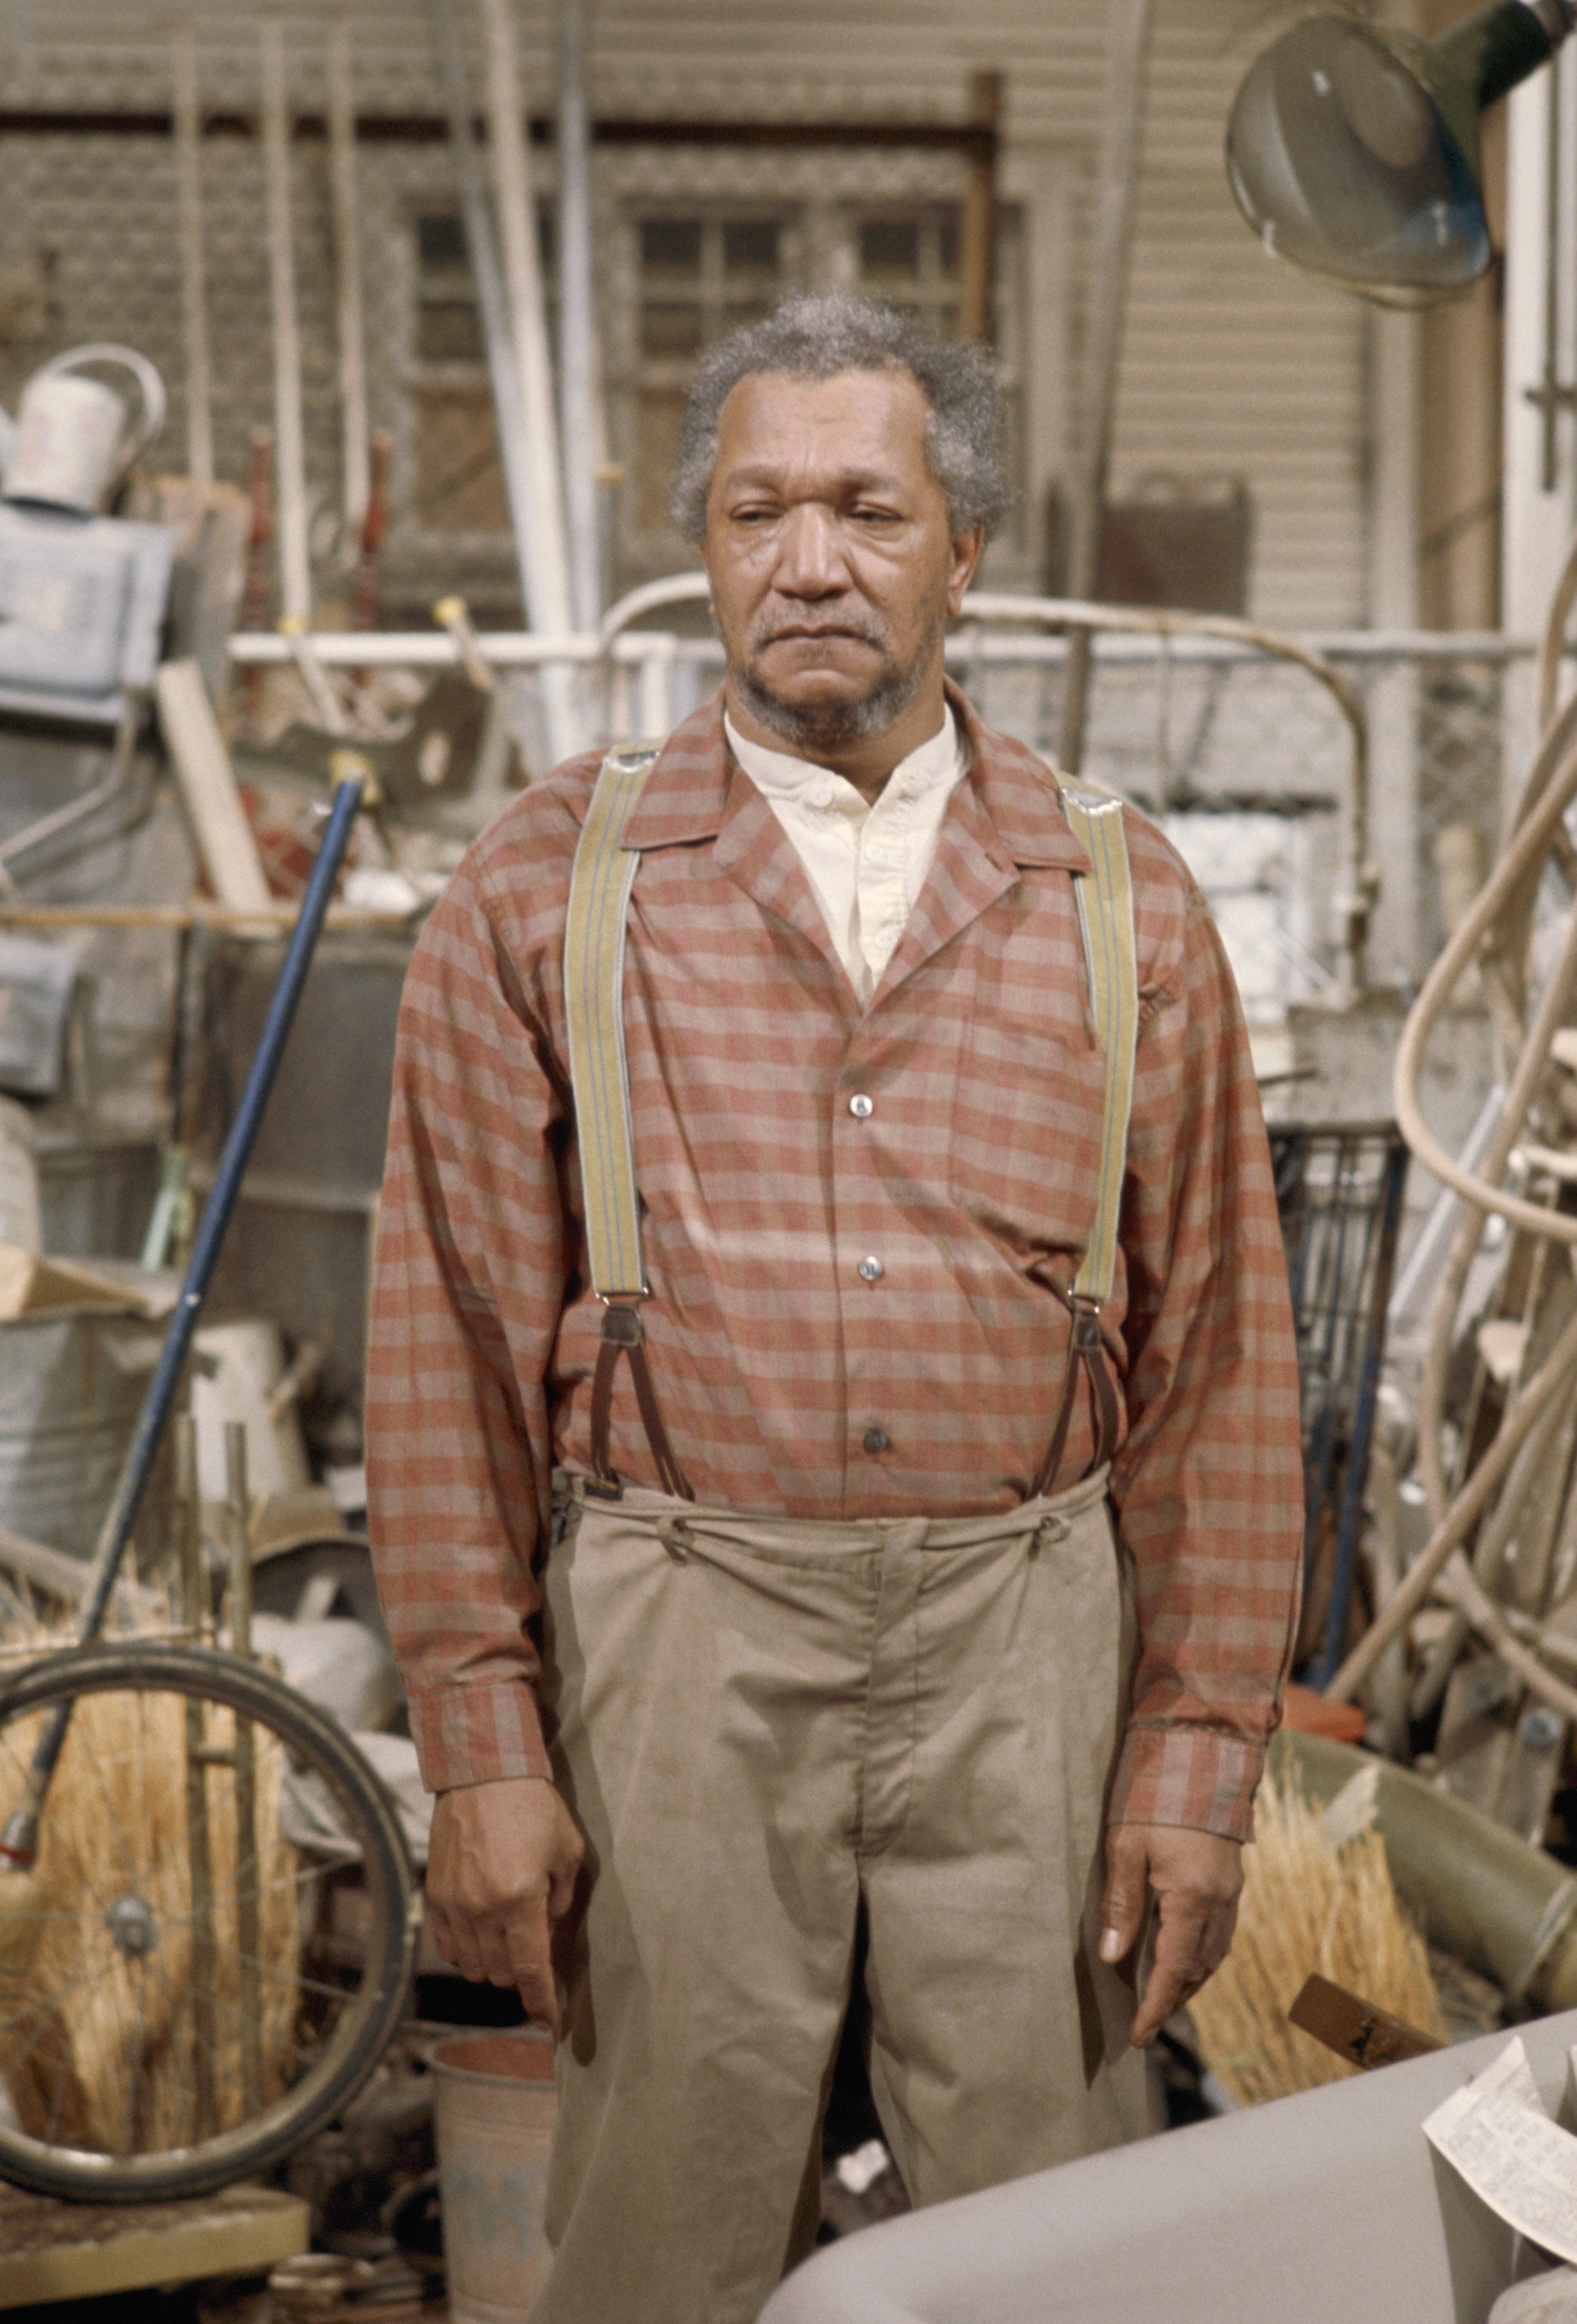 Redd Foxx as Fred G. Sanford on "Sanford and Son." | Photo: Getty Images